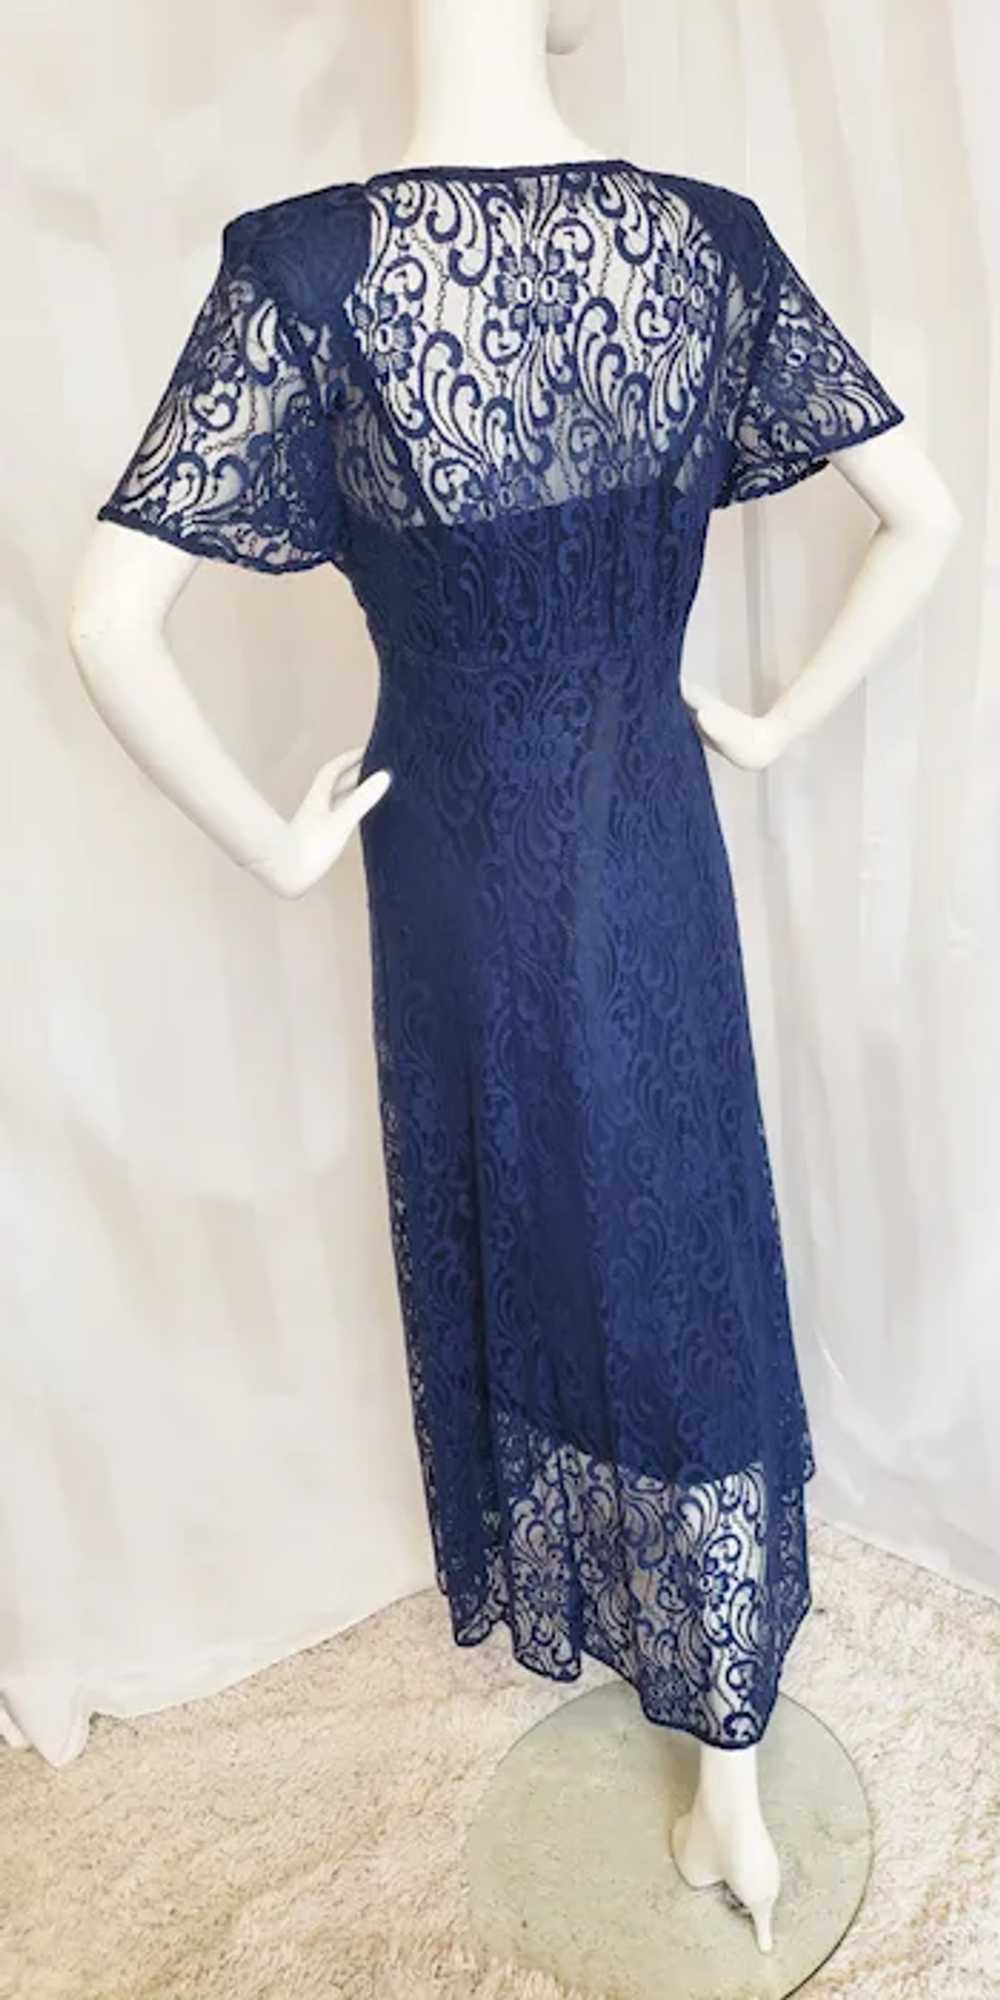 Romantic Lovely Lace Maxi Dress - image 4